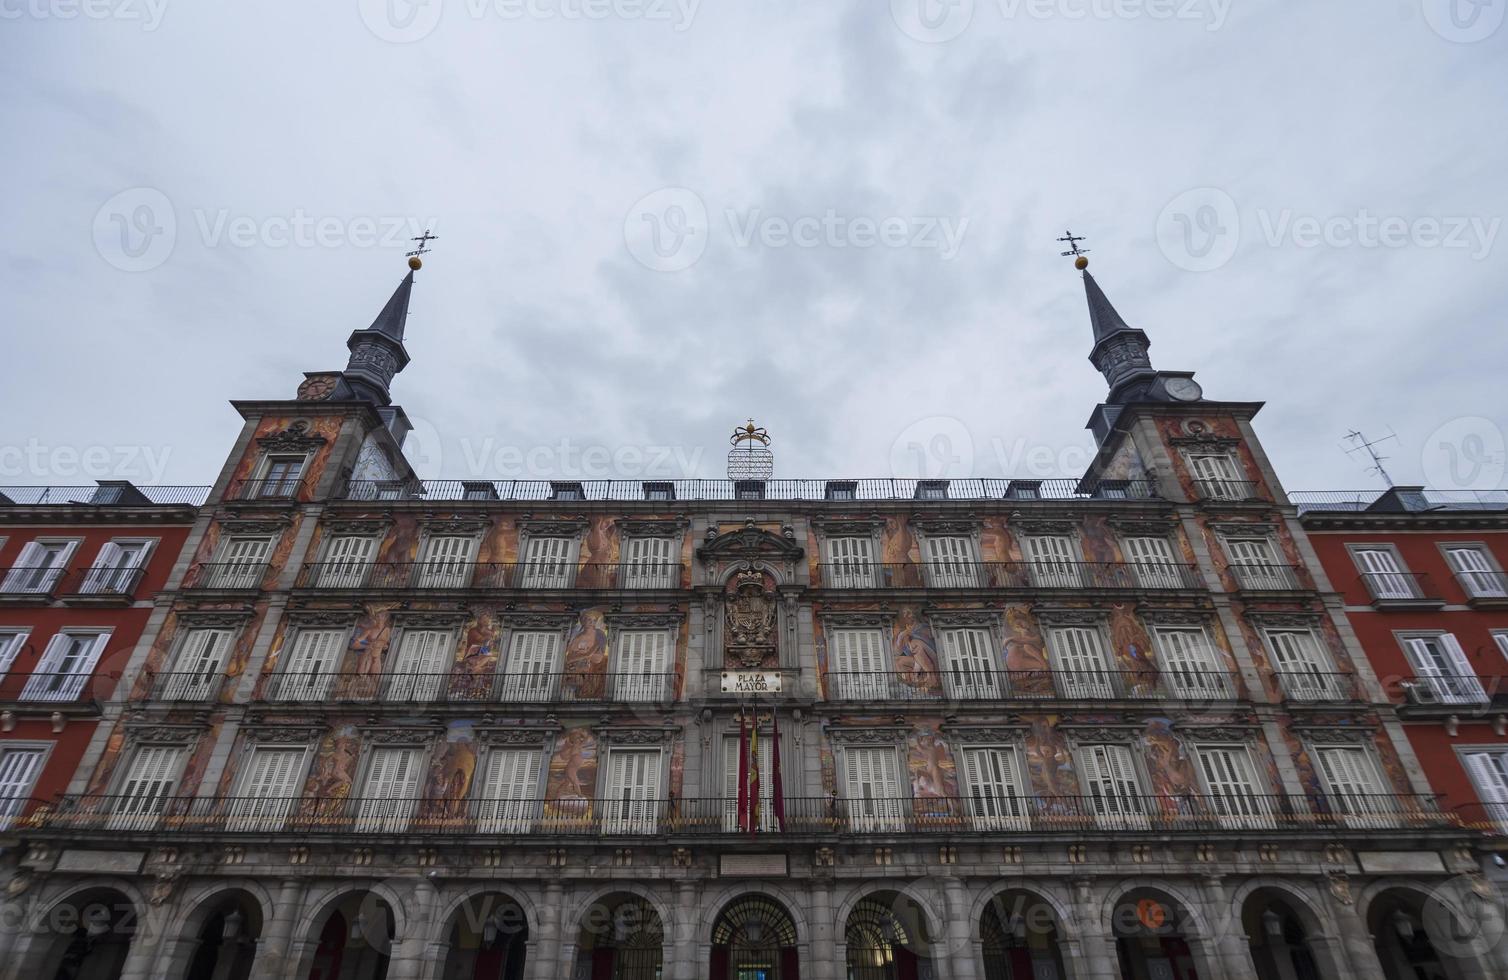 Plaza Mayor is a city square and skyline built during the reign of Felipe III in Madrid, Spain, with its colorful buildings and distinctive architecture. photo